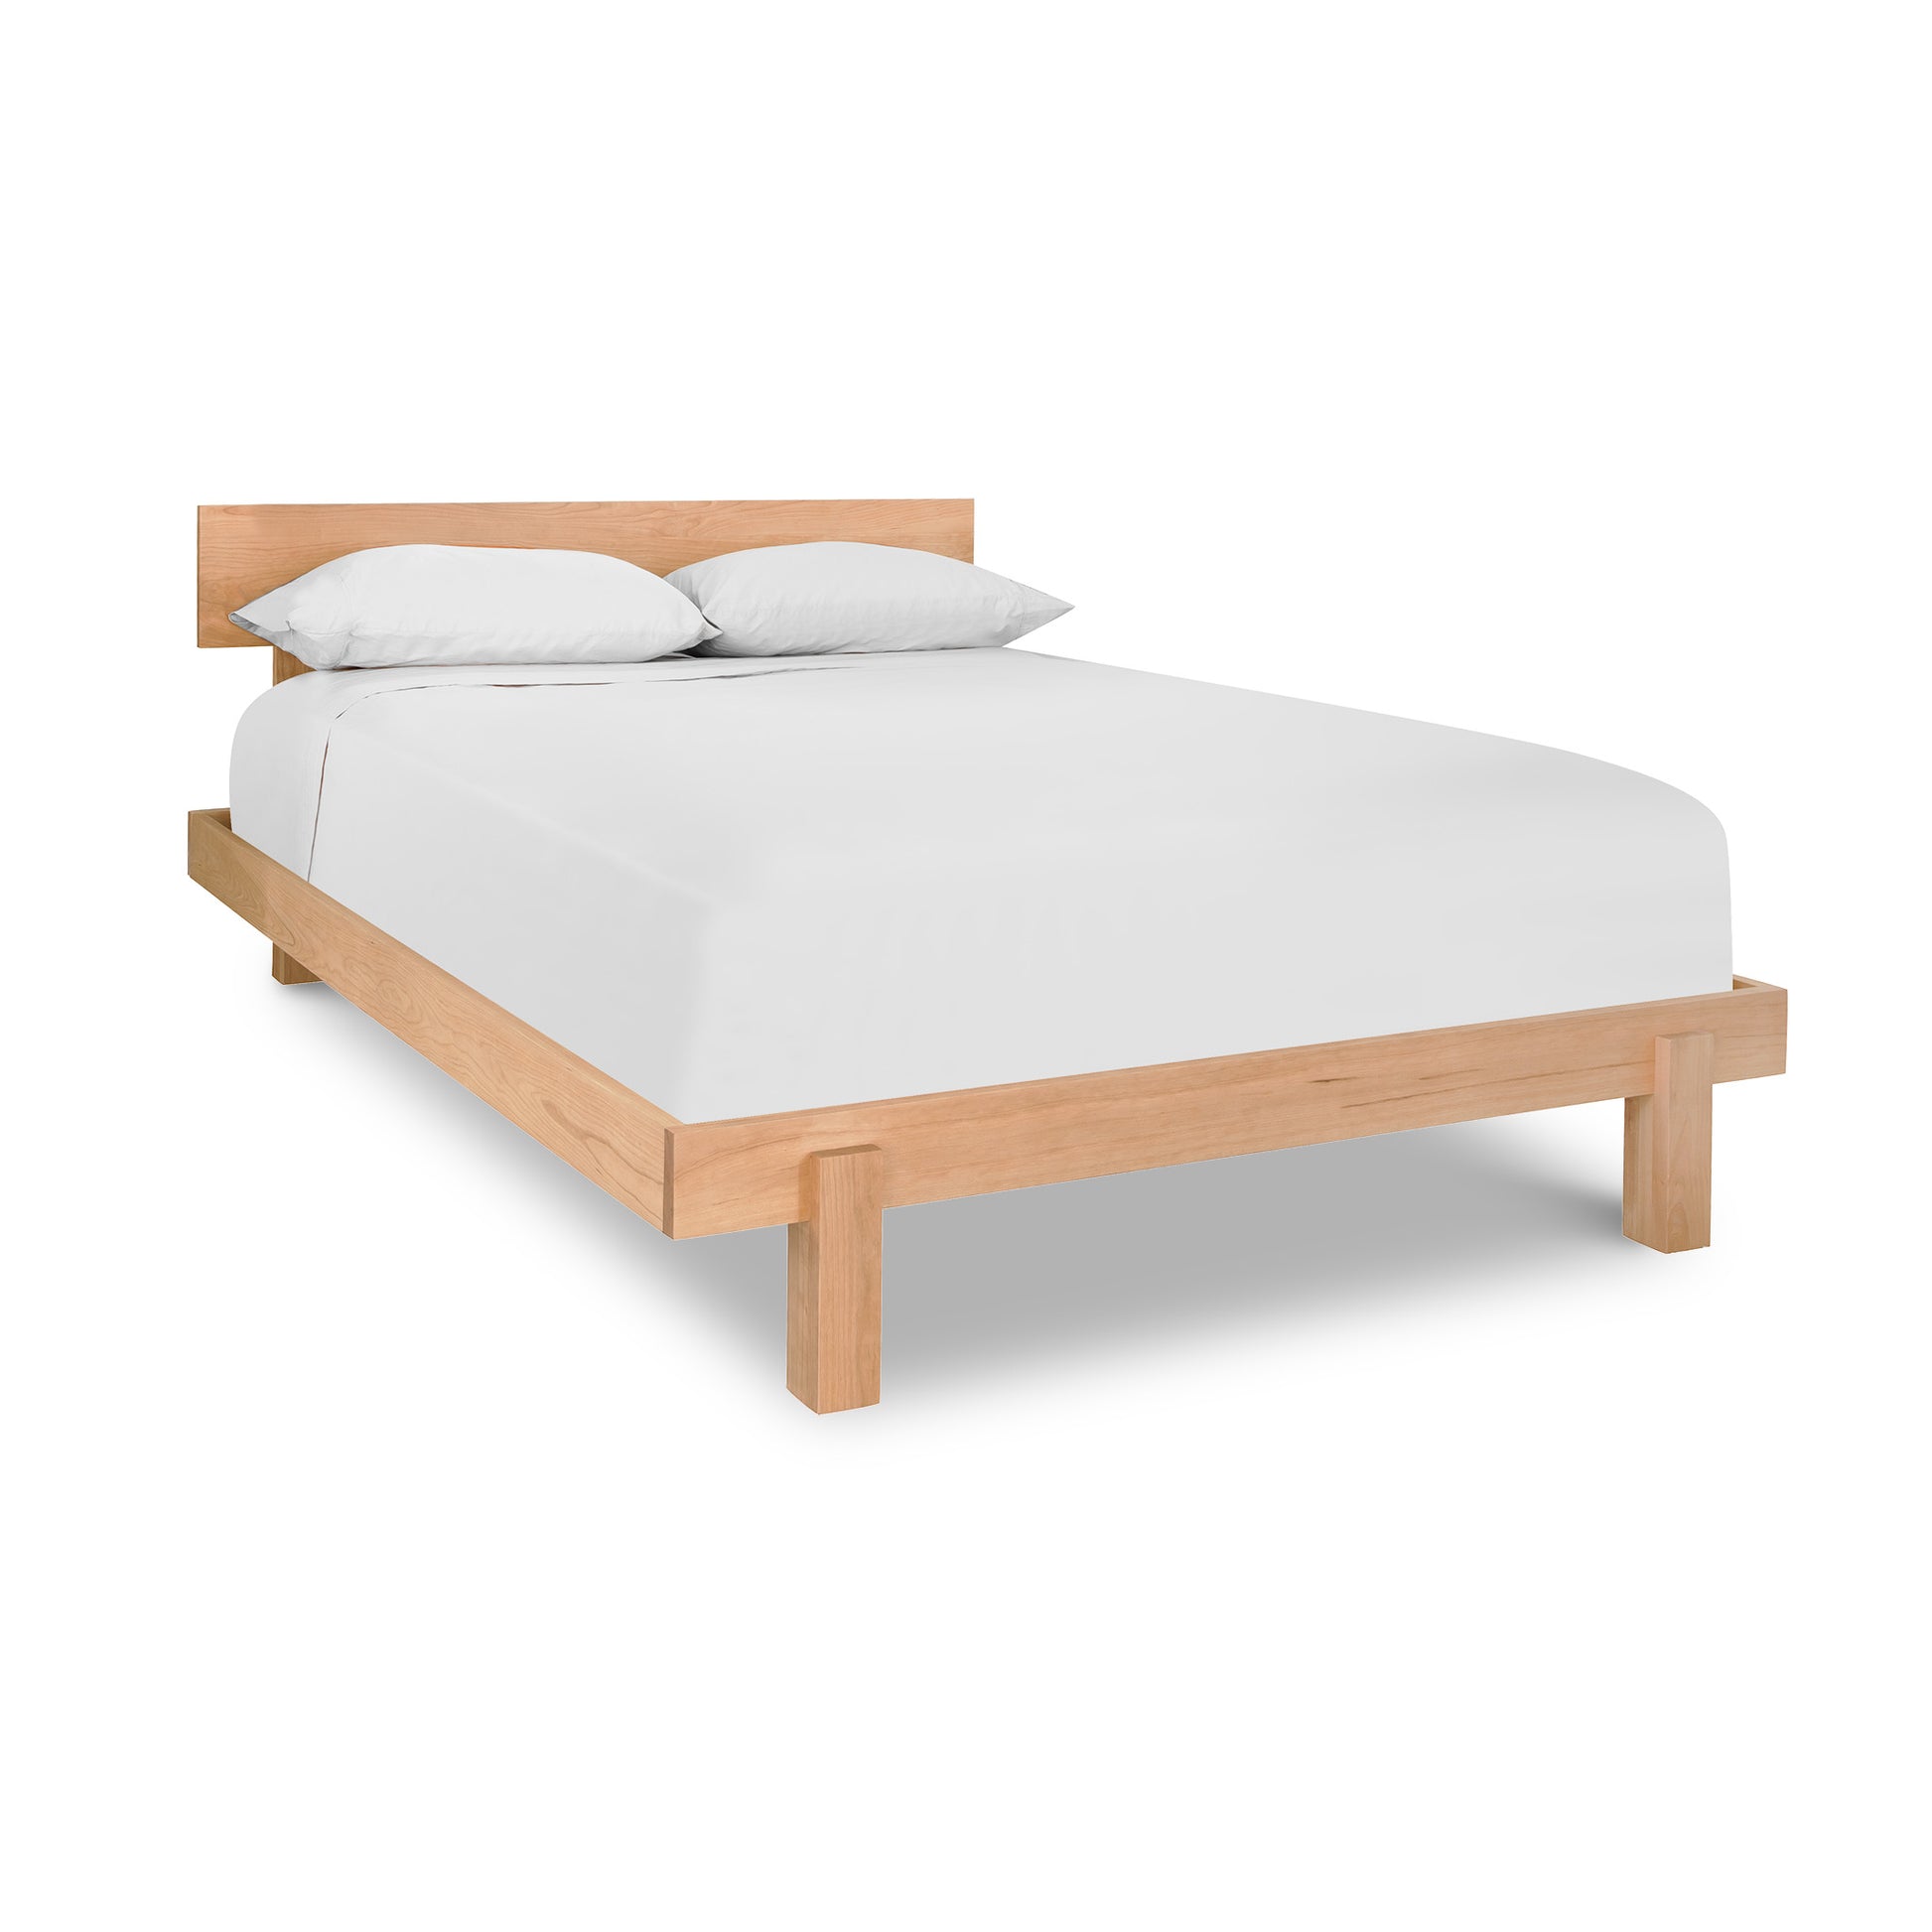 A solid wood Vermont Furniture Designs Kipling Bed frame with a white mattress and two pillows on a white background.